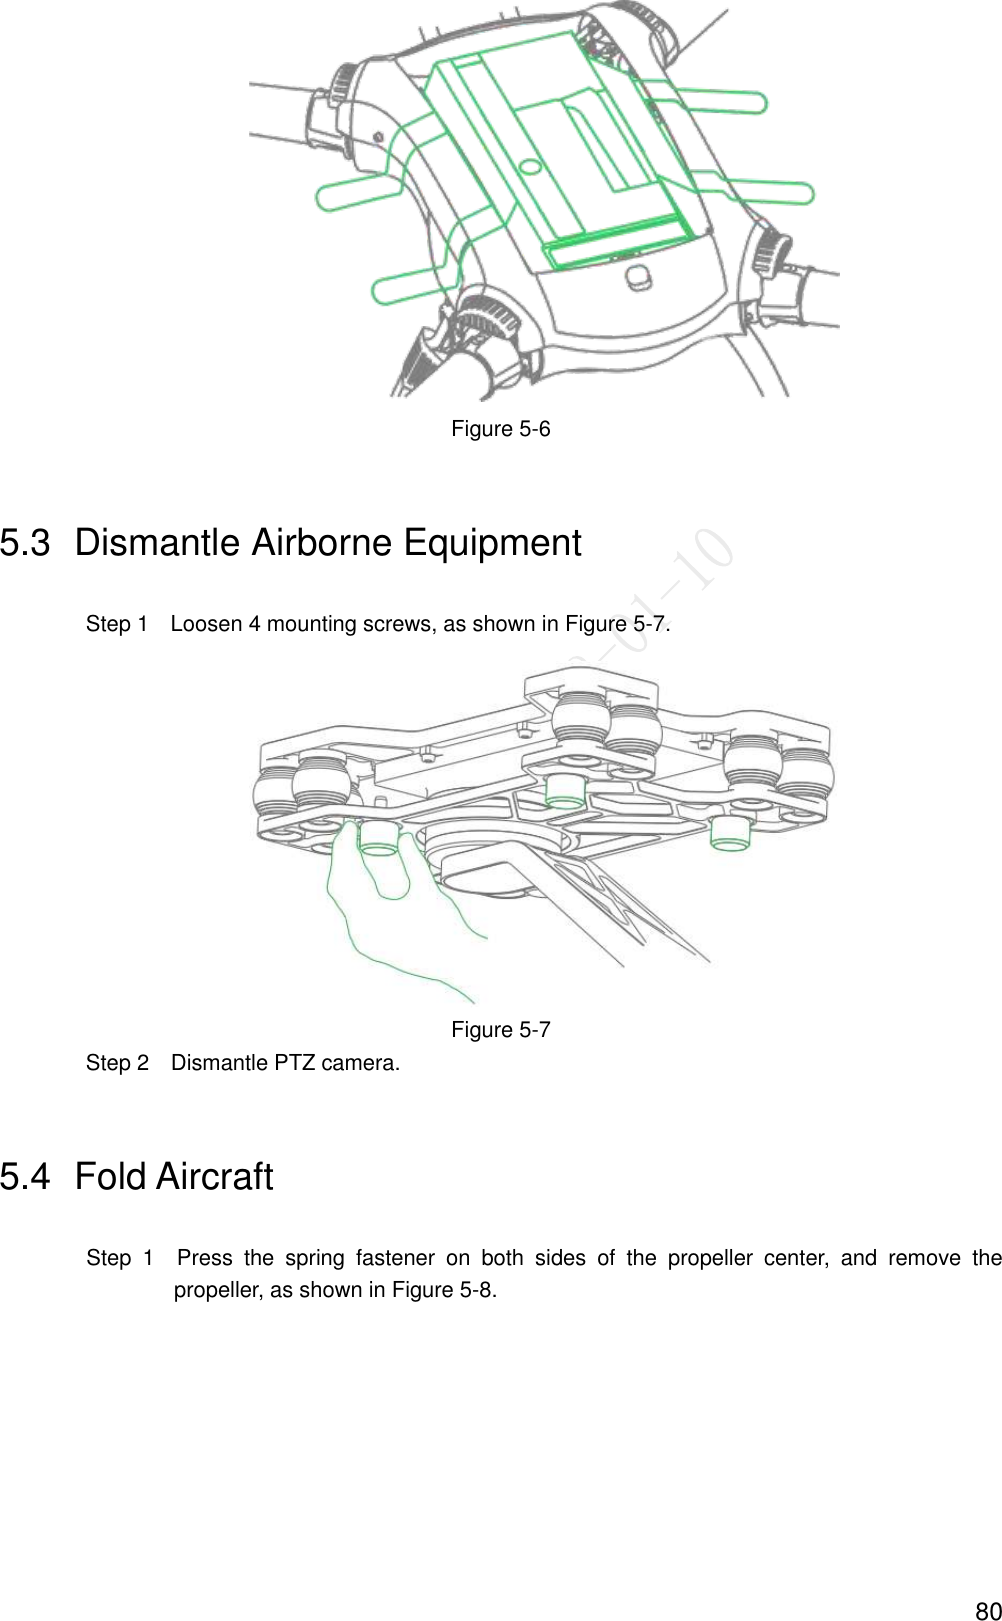  80  Figure 5-6 5.3  Dismantle Airborne Equipment Step 1    Loosen 4 mounting screws, as shown in Figure 5-7.  Figure 5-7 Step 2    Dismantle PTZ camera.   5.4  Fold Aircraft                   Step  1    Press  the  spring  fastener  on  both  sides  of  the  propeller  center,  and  remove  the propeller, as shown in Figure 5-8. 